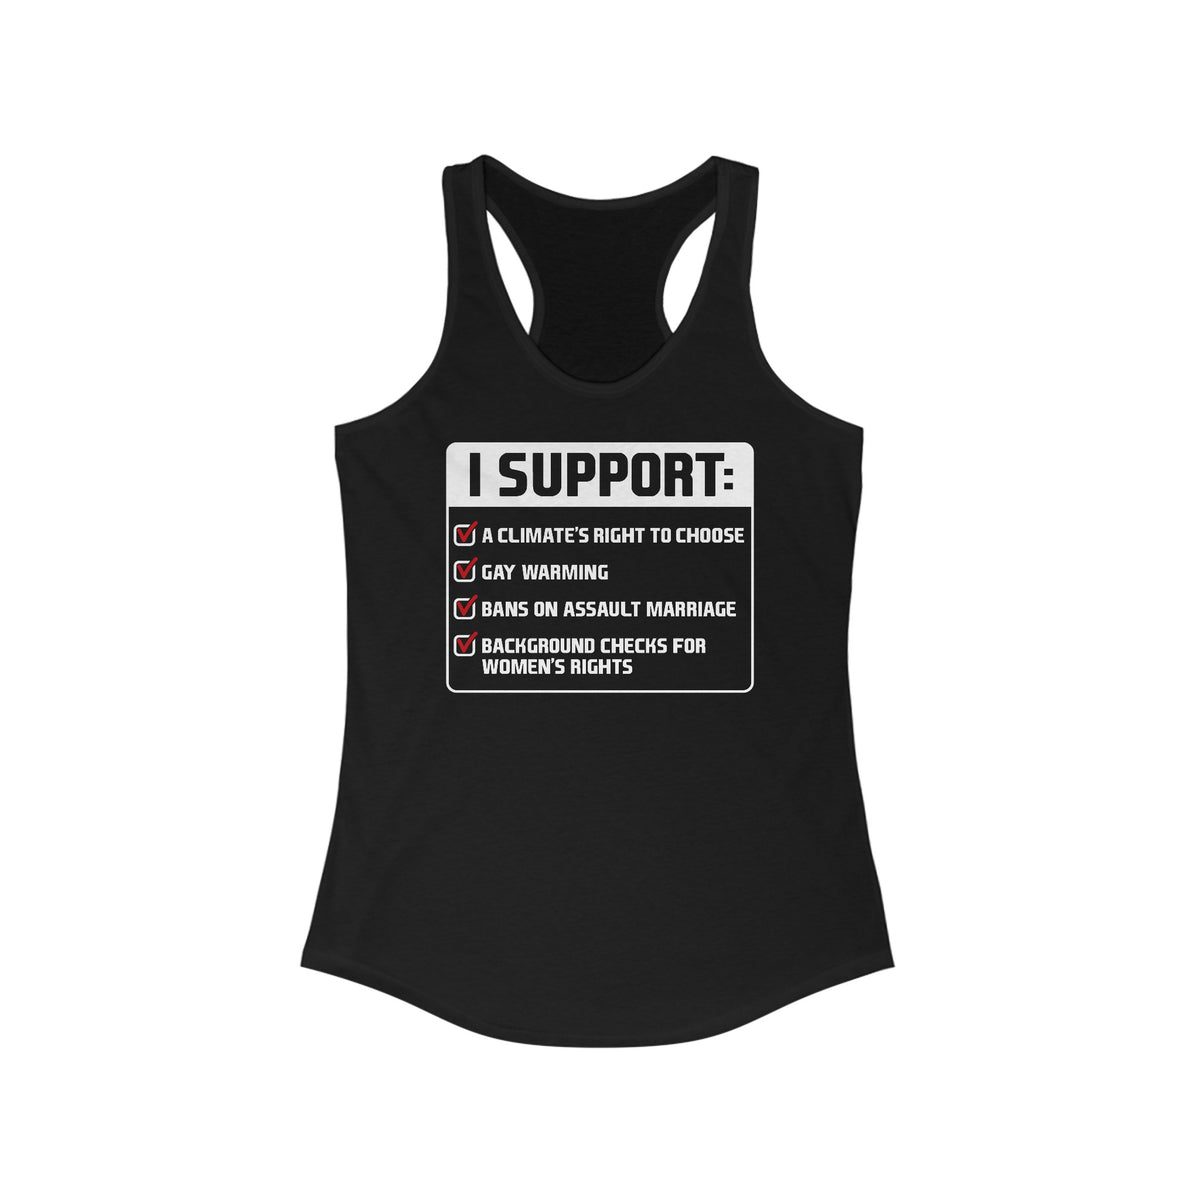 I Support A Climate's Right To Choose - Women’s Racerback Tank